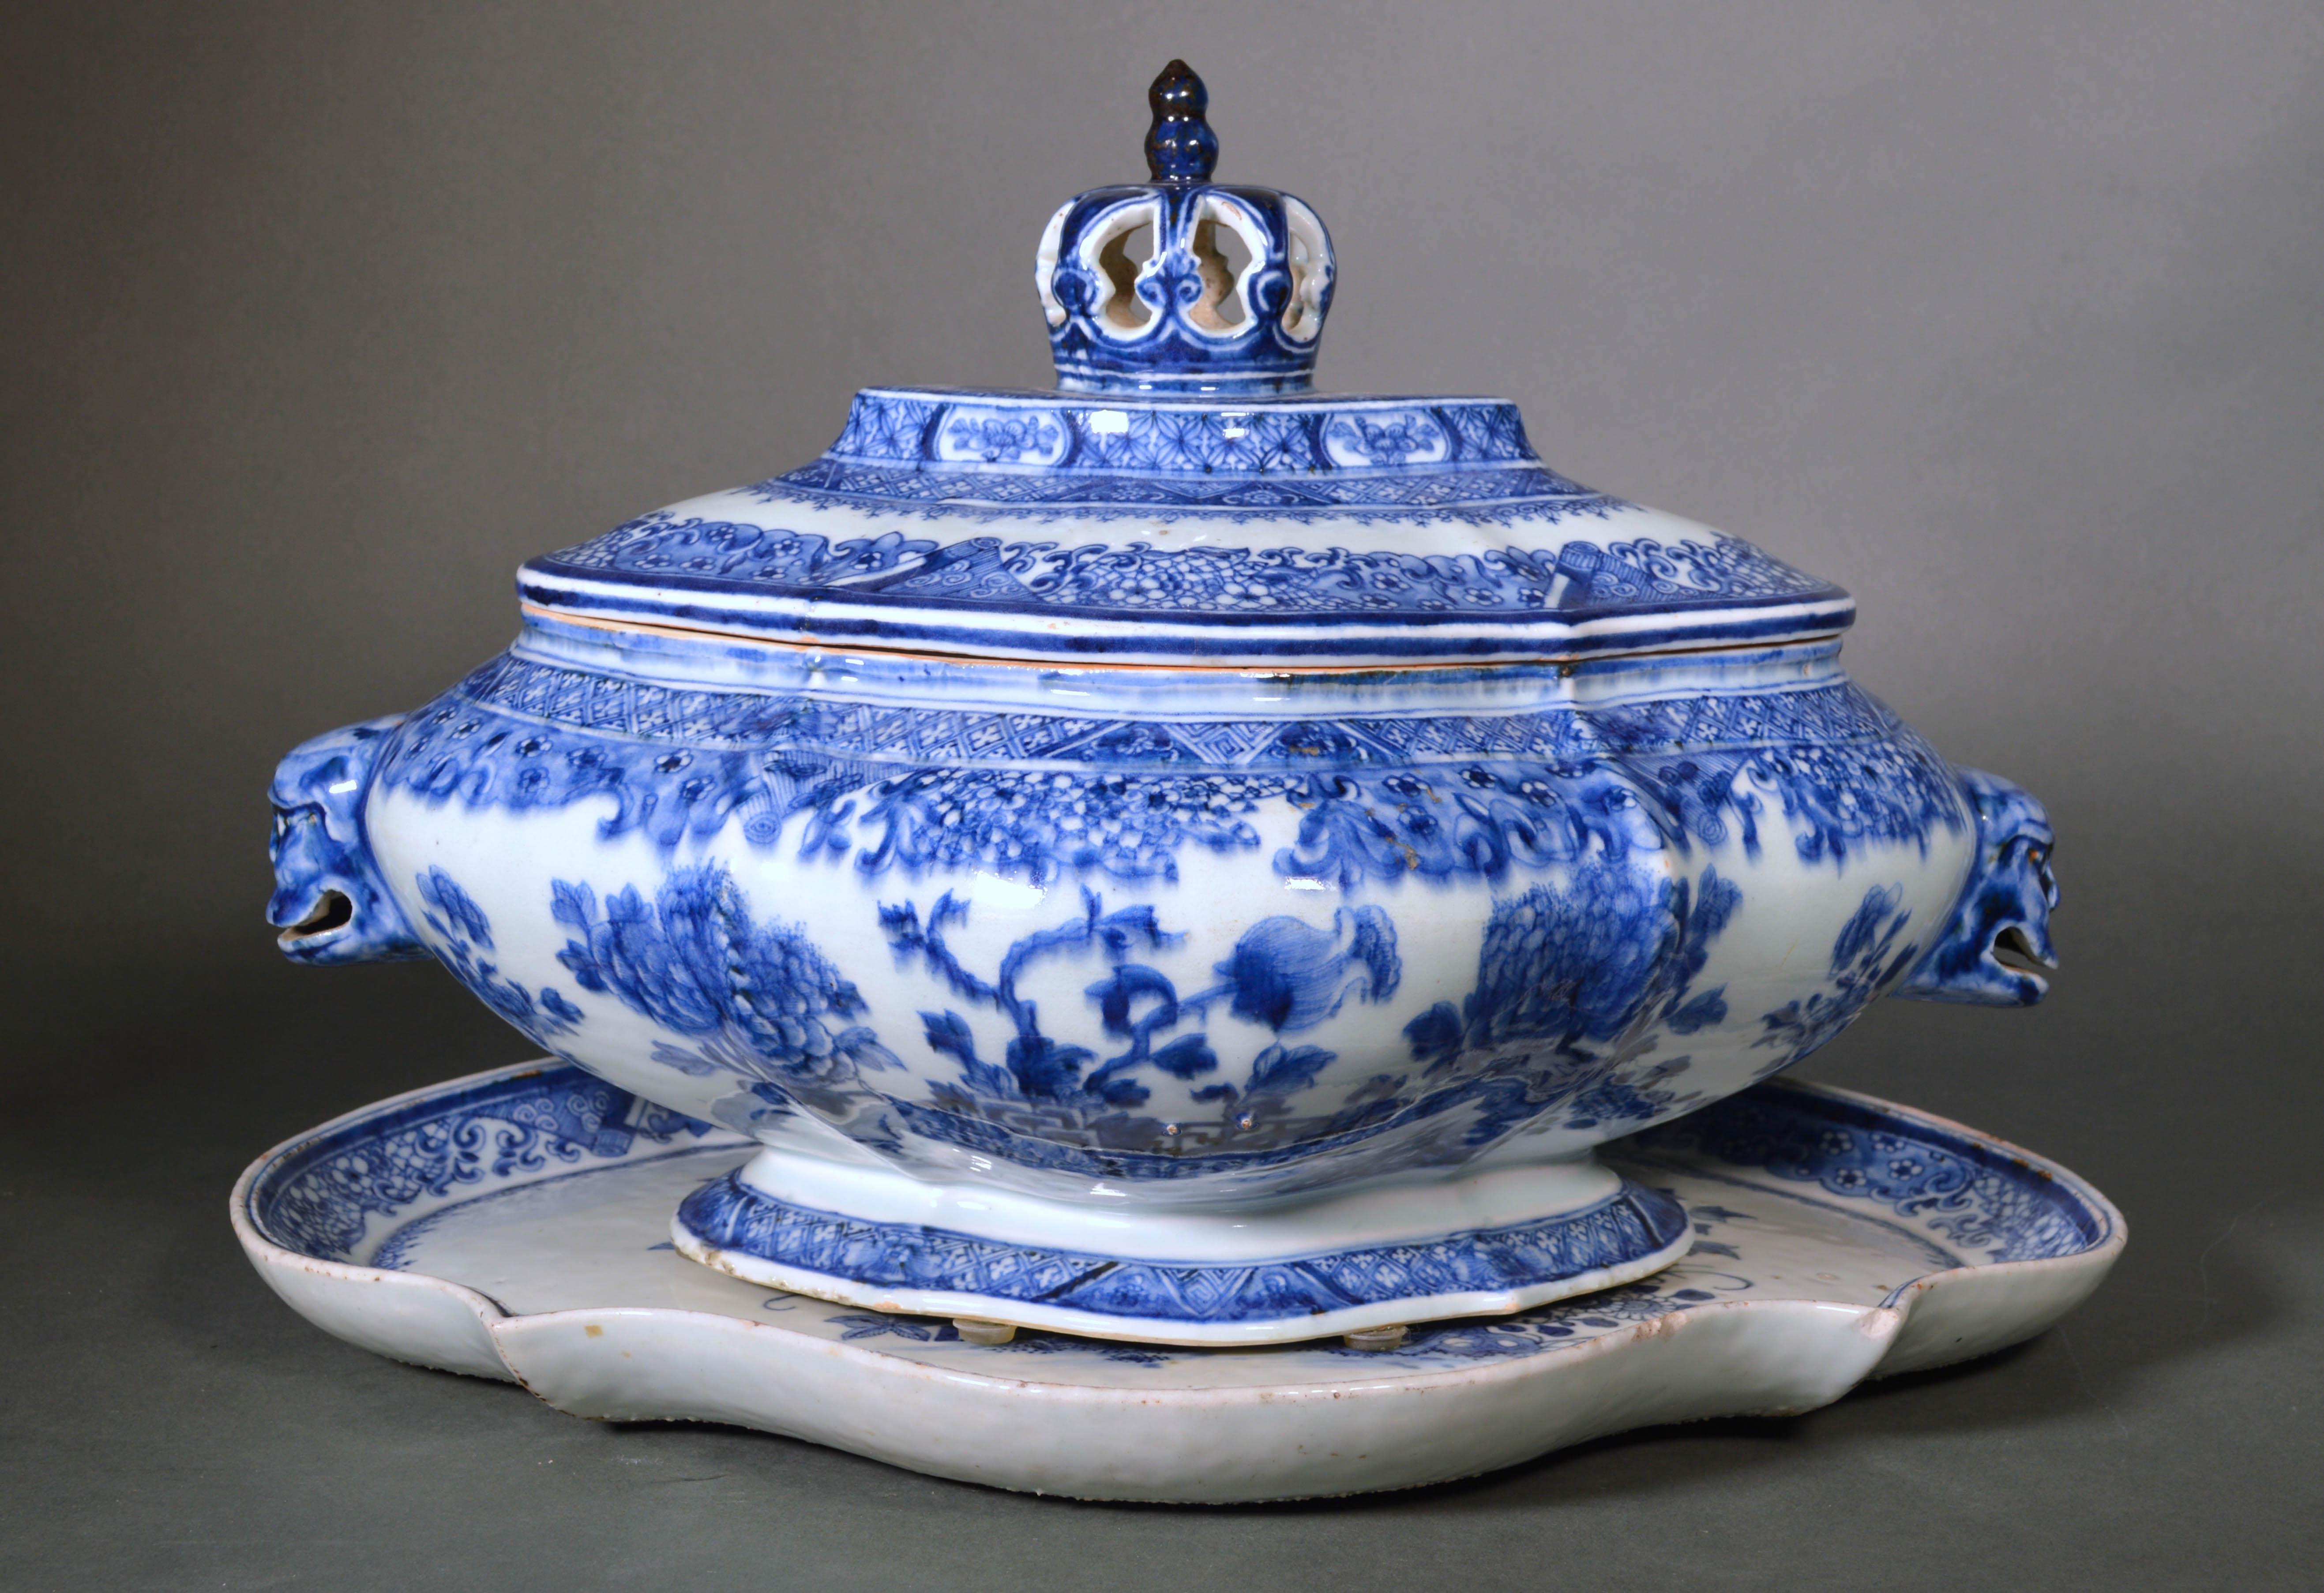 18th Century Early Chinese Export Porcelain Blue and White Soup Tureen, Cover and Stand For Sale